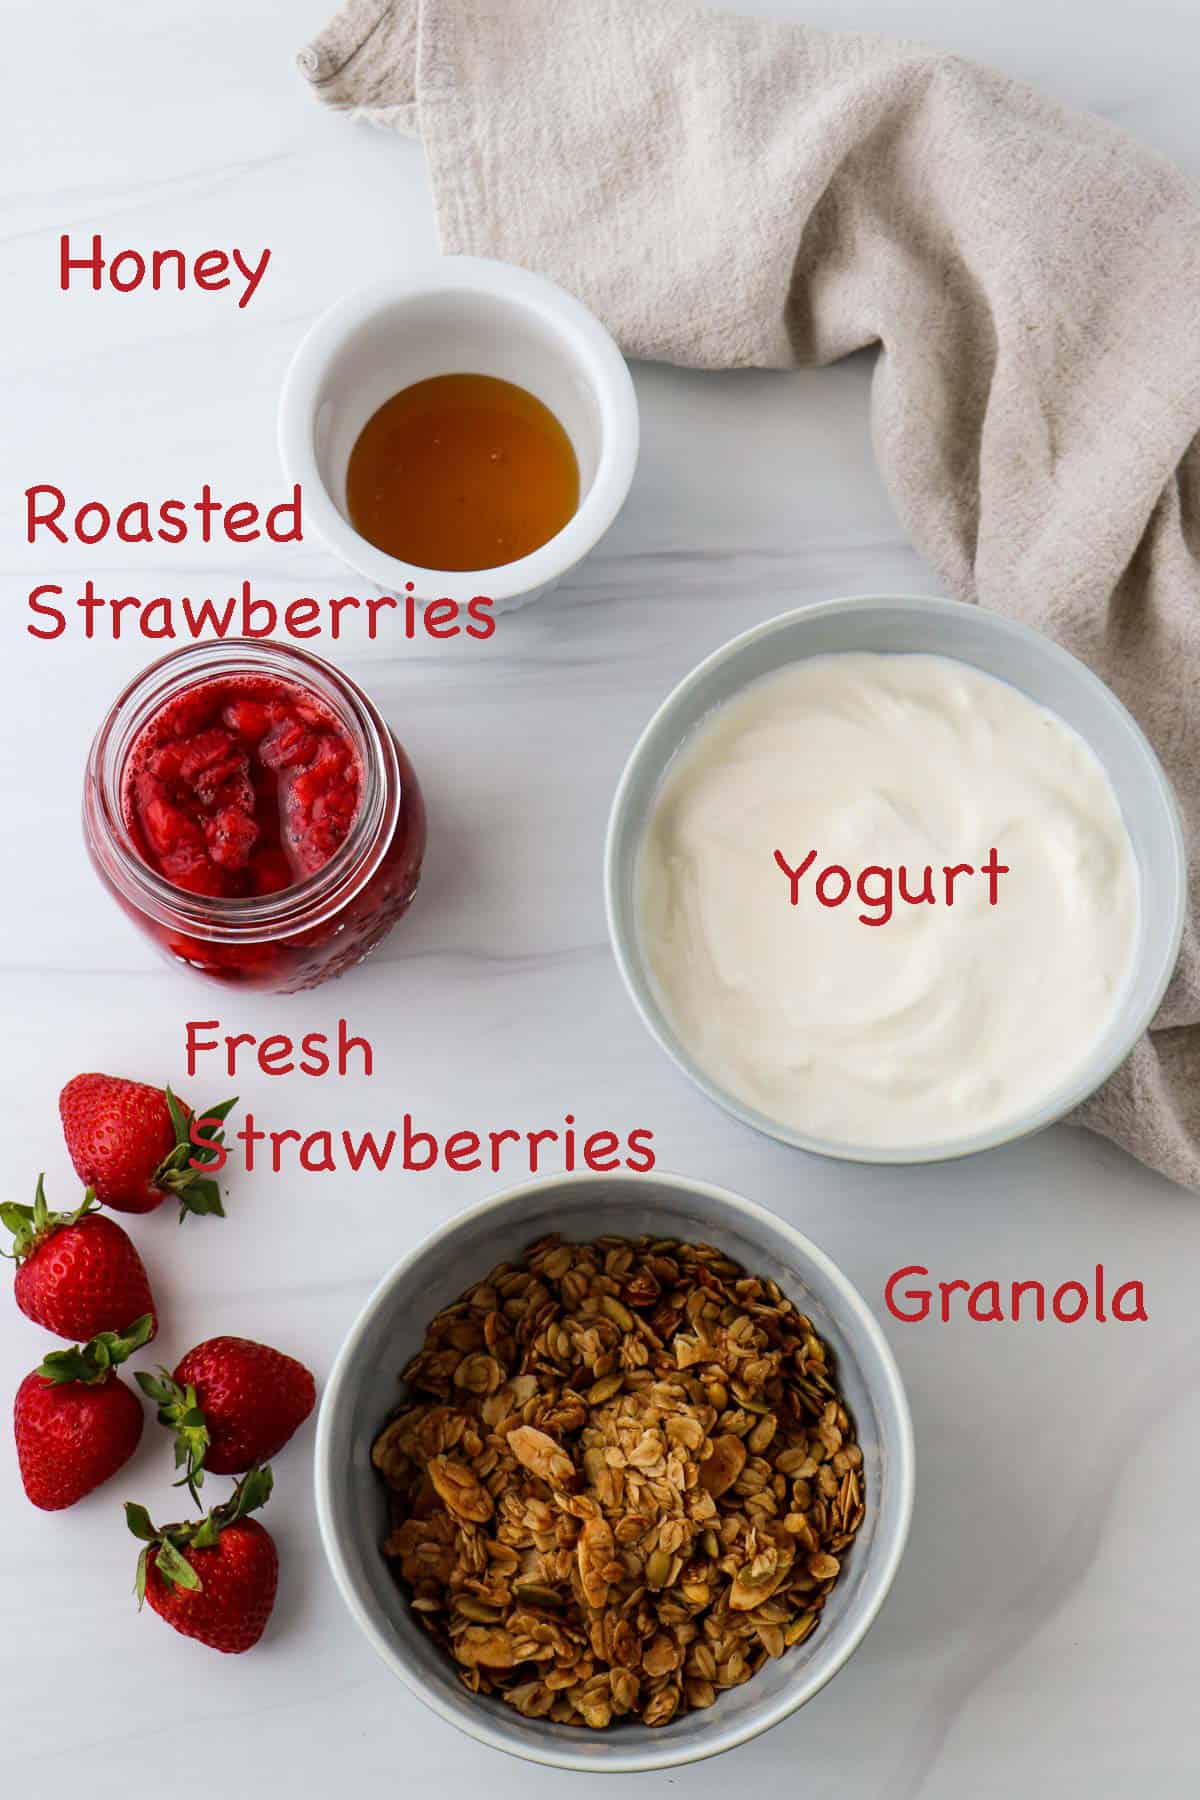 Labeled ingredients for Homemade Granola and Yogurt Parfaits